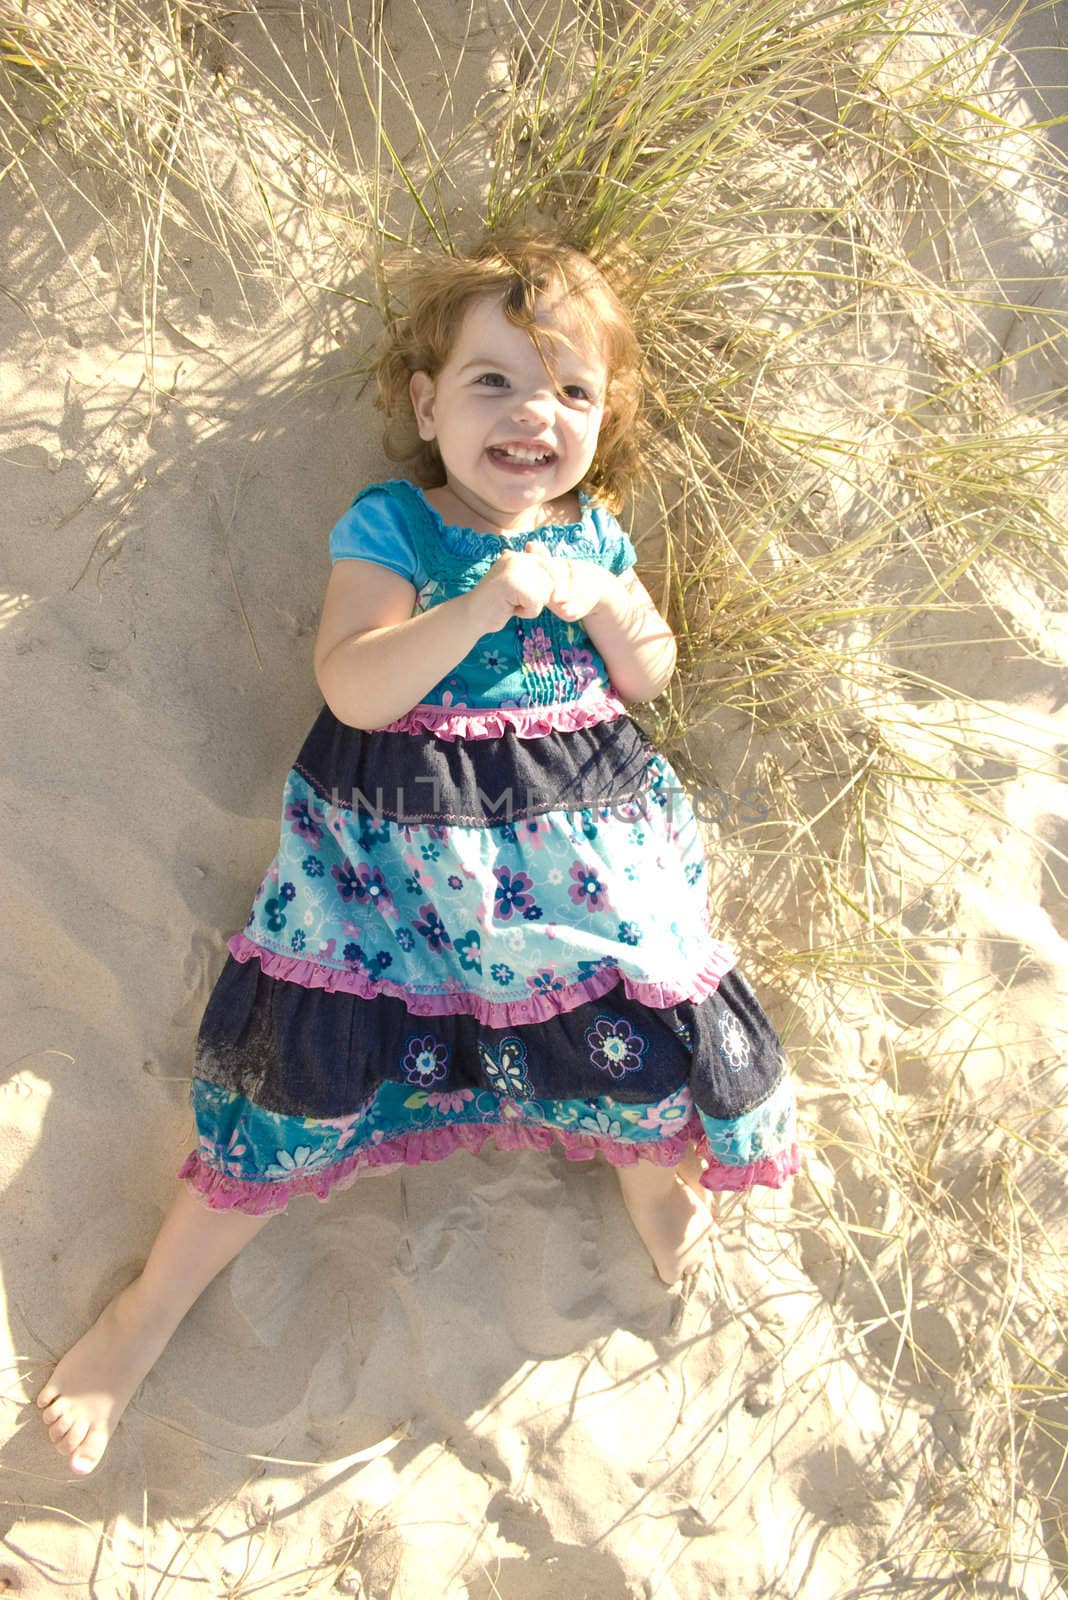 A little girl is laying on a sand dune in the sun, smiling